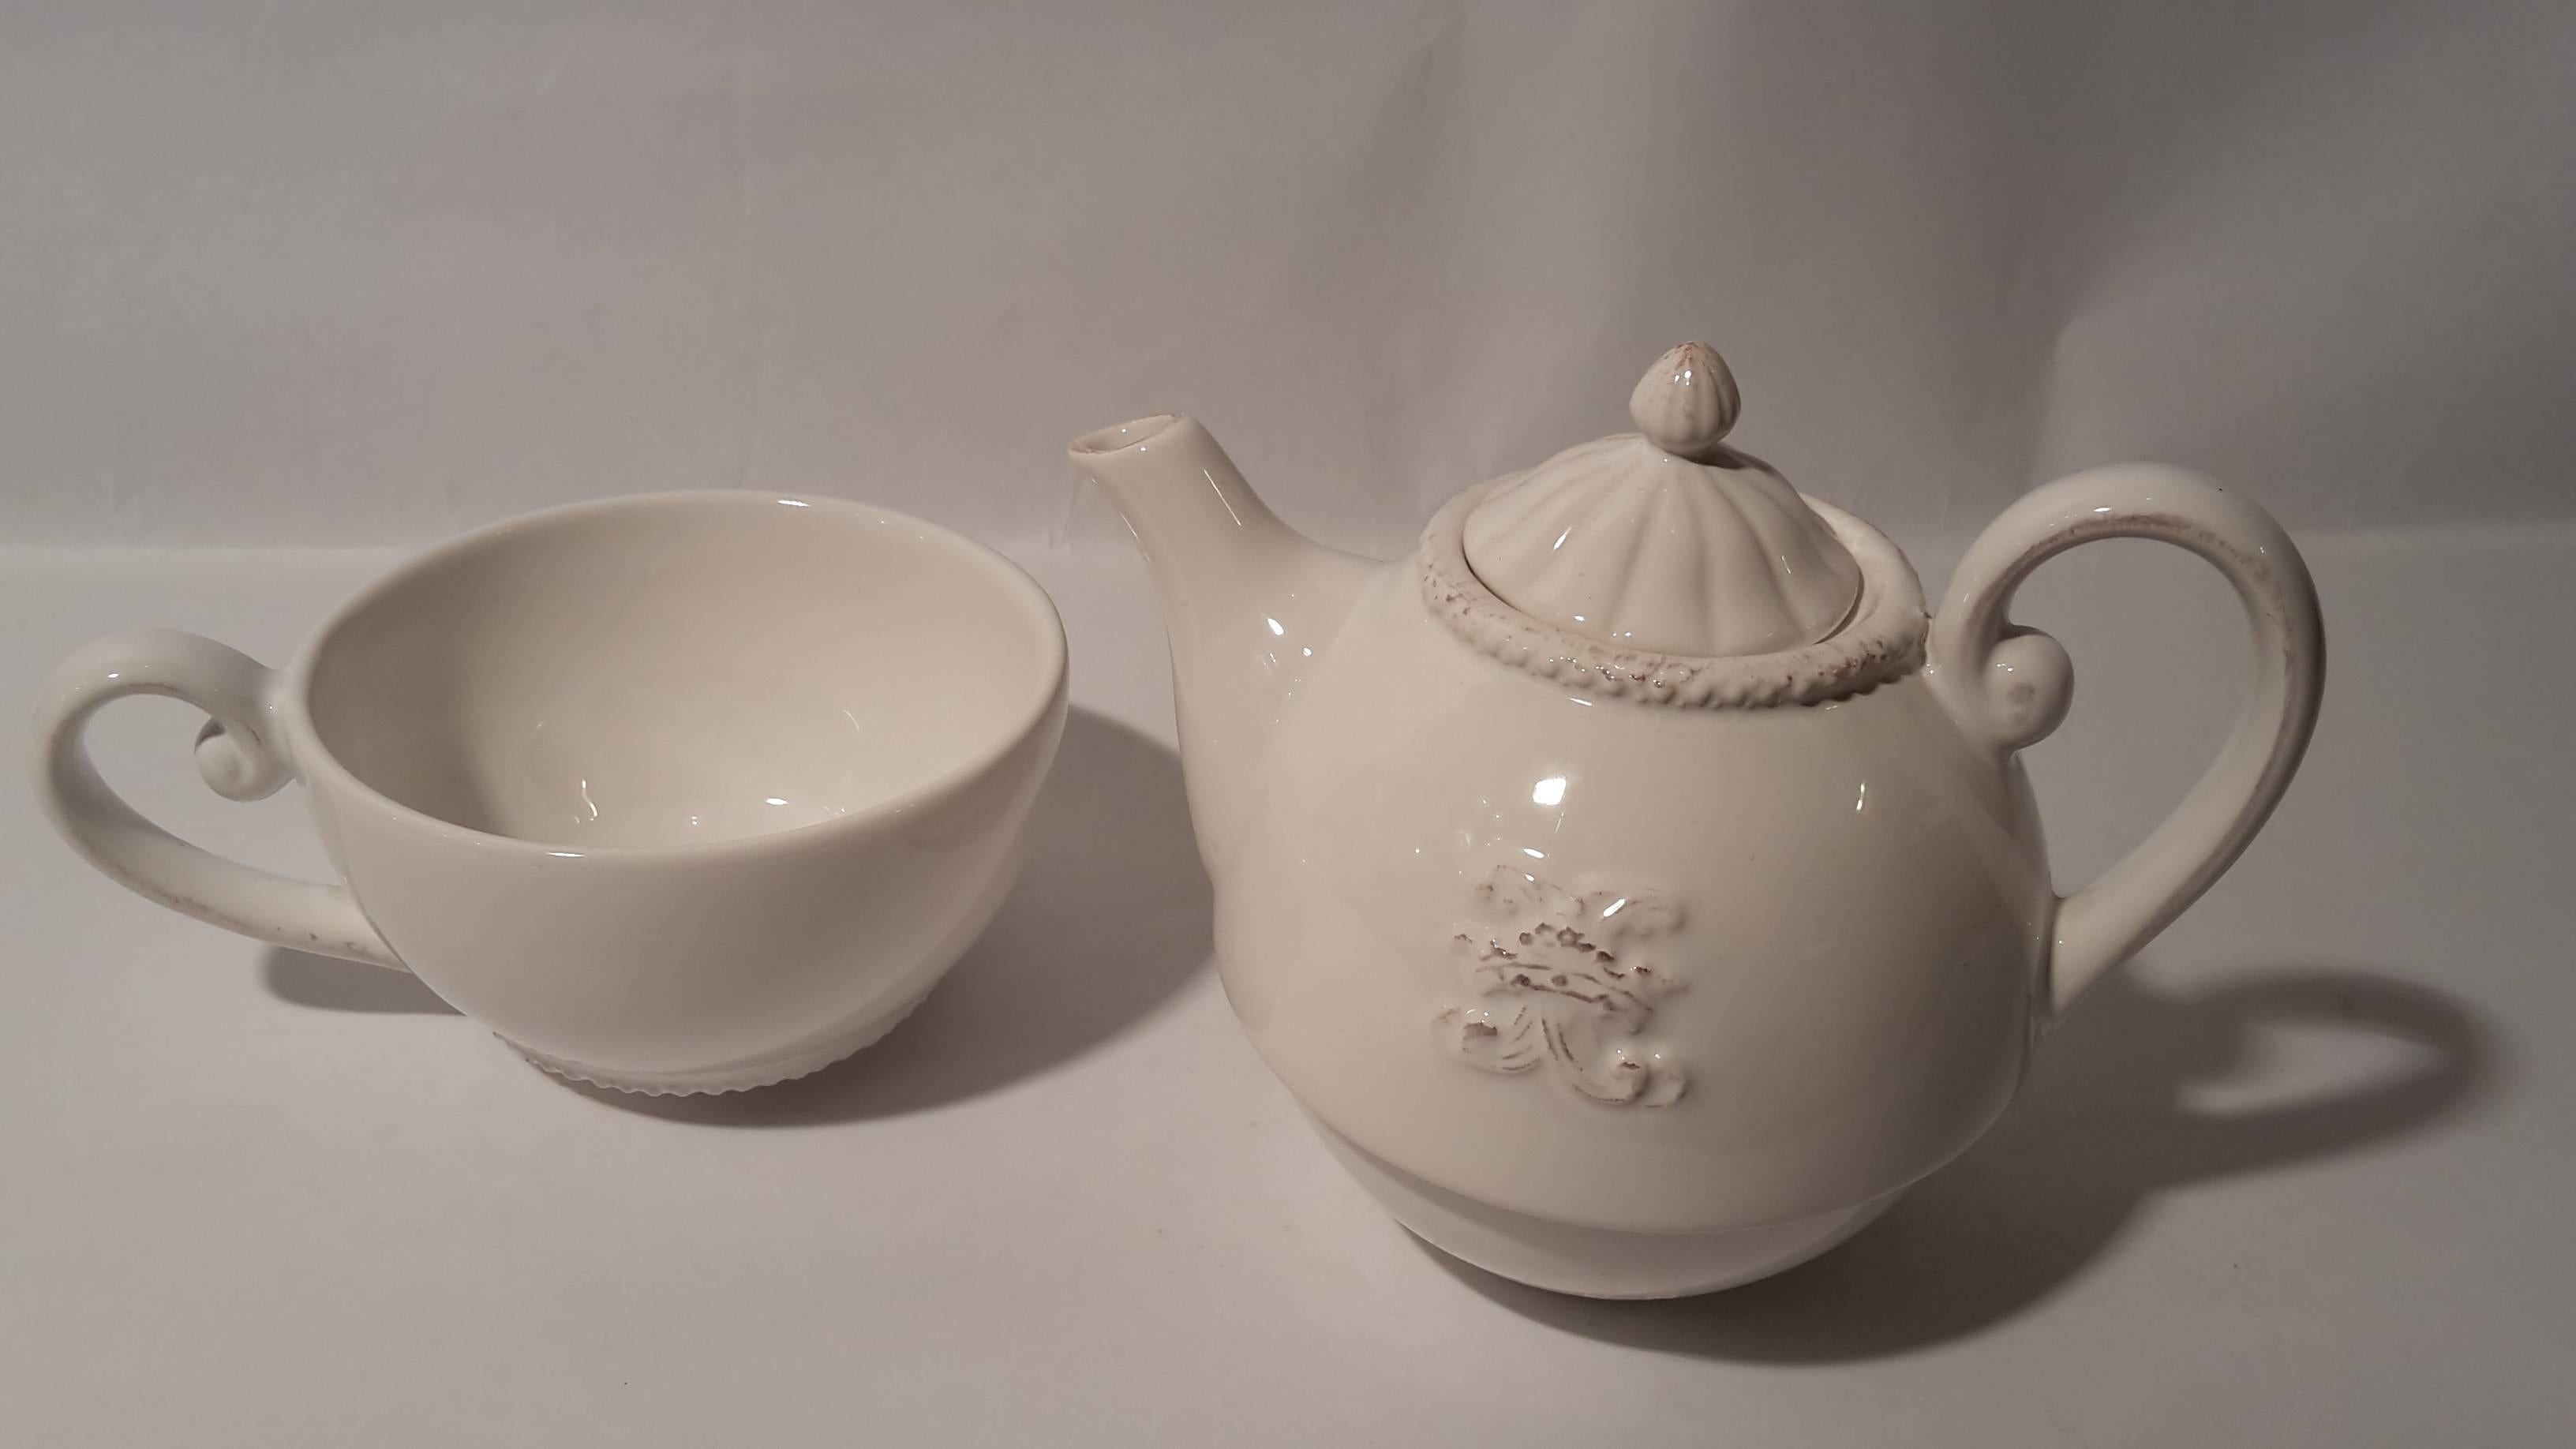 Teapot and mug in white ceramic. Stackable.
Contemporary from France.
Nice size, 